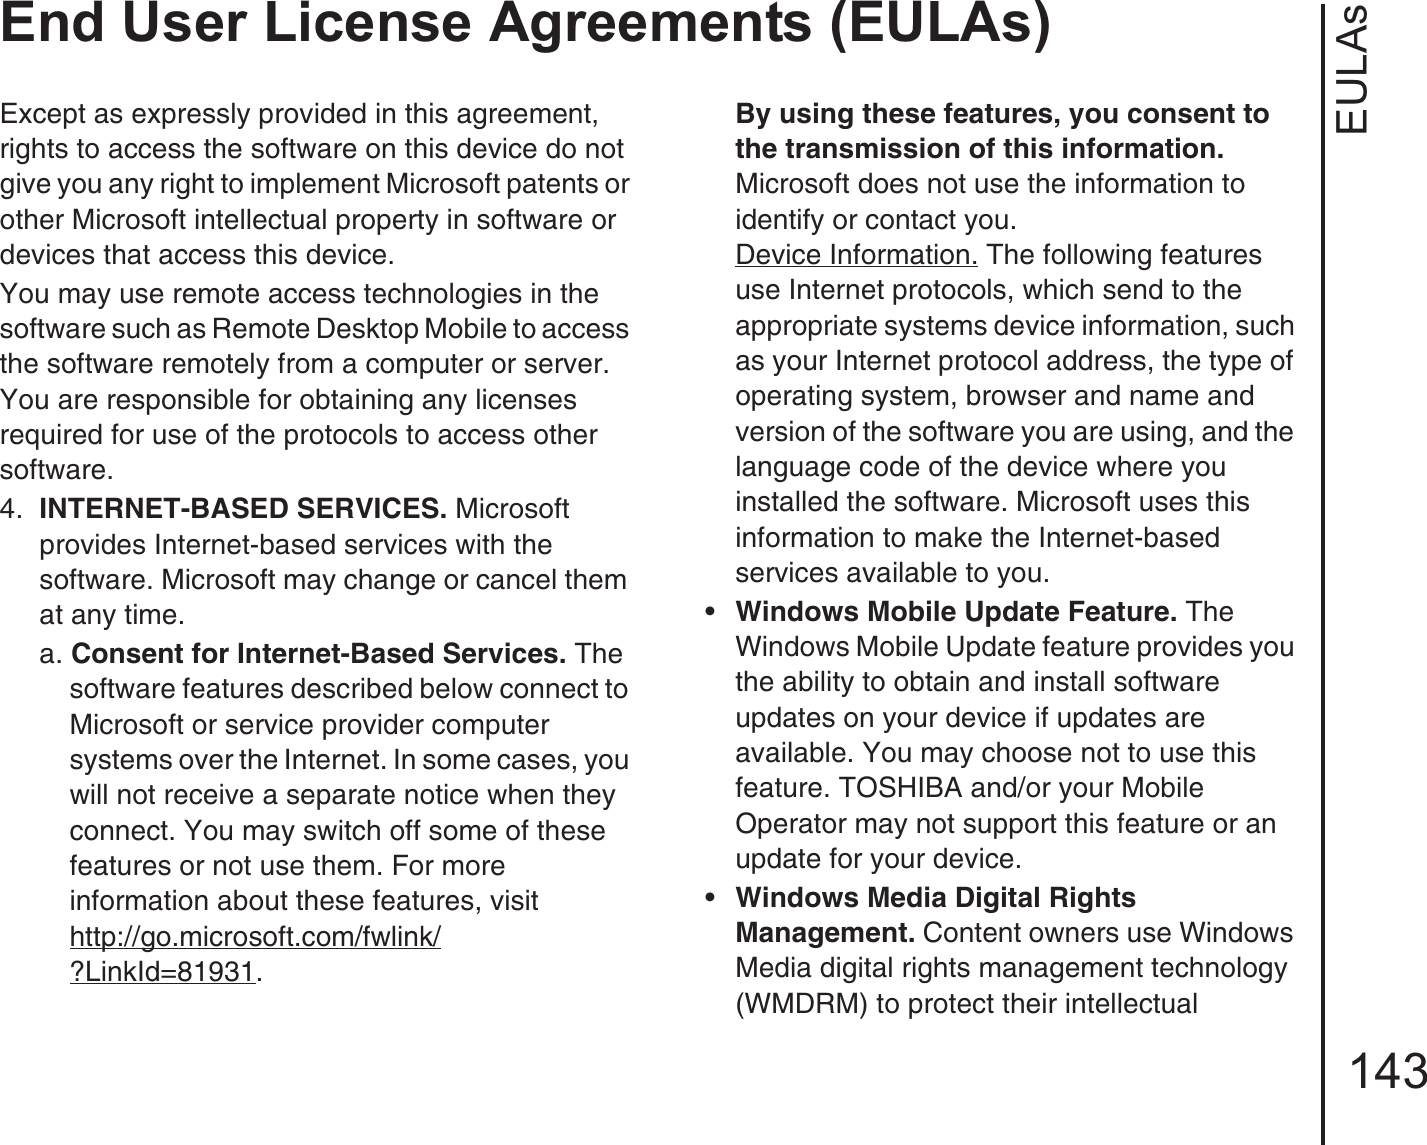 EULAsEnd User License Agreements (EULAs)143Except as expressly provided in this agreement, rights to access the software on this device do not give you any right to implement Microsoft patents or other Microsoft intellectual property in software or devices that access this device.You may use remote access technologies in the software such as Remote Desktop Mobile to access the software remotely from a computer or server. You are responsible for obtaining any licenses required for use of the protocols to access other software.4.  INTERNET-BASED SERVICES. Microsoft provides Internet-based services with the software. Microsoft may change or cancel them at any time.a. Consent for Internet-Based Services. The software features described below connect to Microsoft or service provider computer systems over the Internet. In some cases, you will not receive a separate notice when they connect. You may switch off some of these features or not use them. For more information about these features, visithttp://go.microsoft.com/fwlink/?LinkId=81931. By using these features, you consent to the transmission of this information. Microsoft does not use the information to identify or contact you.Device Information. The following features use Internet protocols, which send to the appropriate systems device information, such as your Internet protocol address, the type of operating system, browser and name and version of the software you are using, and the language code of the device where you installed the software. Microsoft uses this information to make the Internet-based services available to you. •Windows Mobile Update Feature. The Windows Mobile Update feature provides you the ability to obtain and install software updates on your device if updates are available. You may choose not to use this feature. TOSHIBA and/or your Mobile Operator may not support this feature or an update for your device.•Windows Media Digital Rights Management. Content owners use Windows Media digital rights management technology (WMDRM) to protect their intellectual 